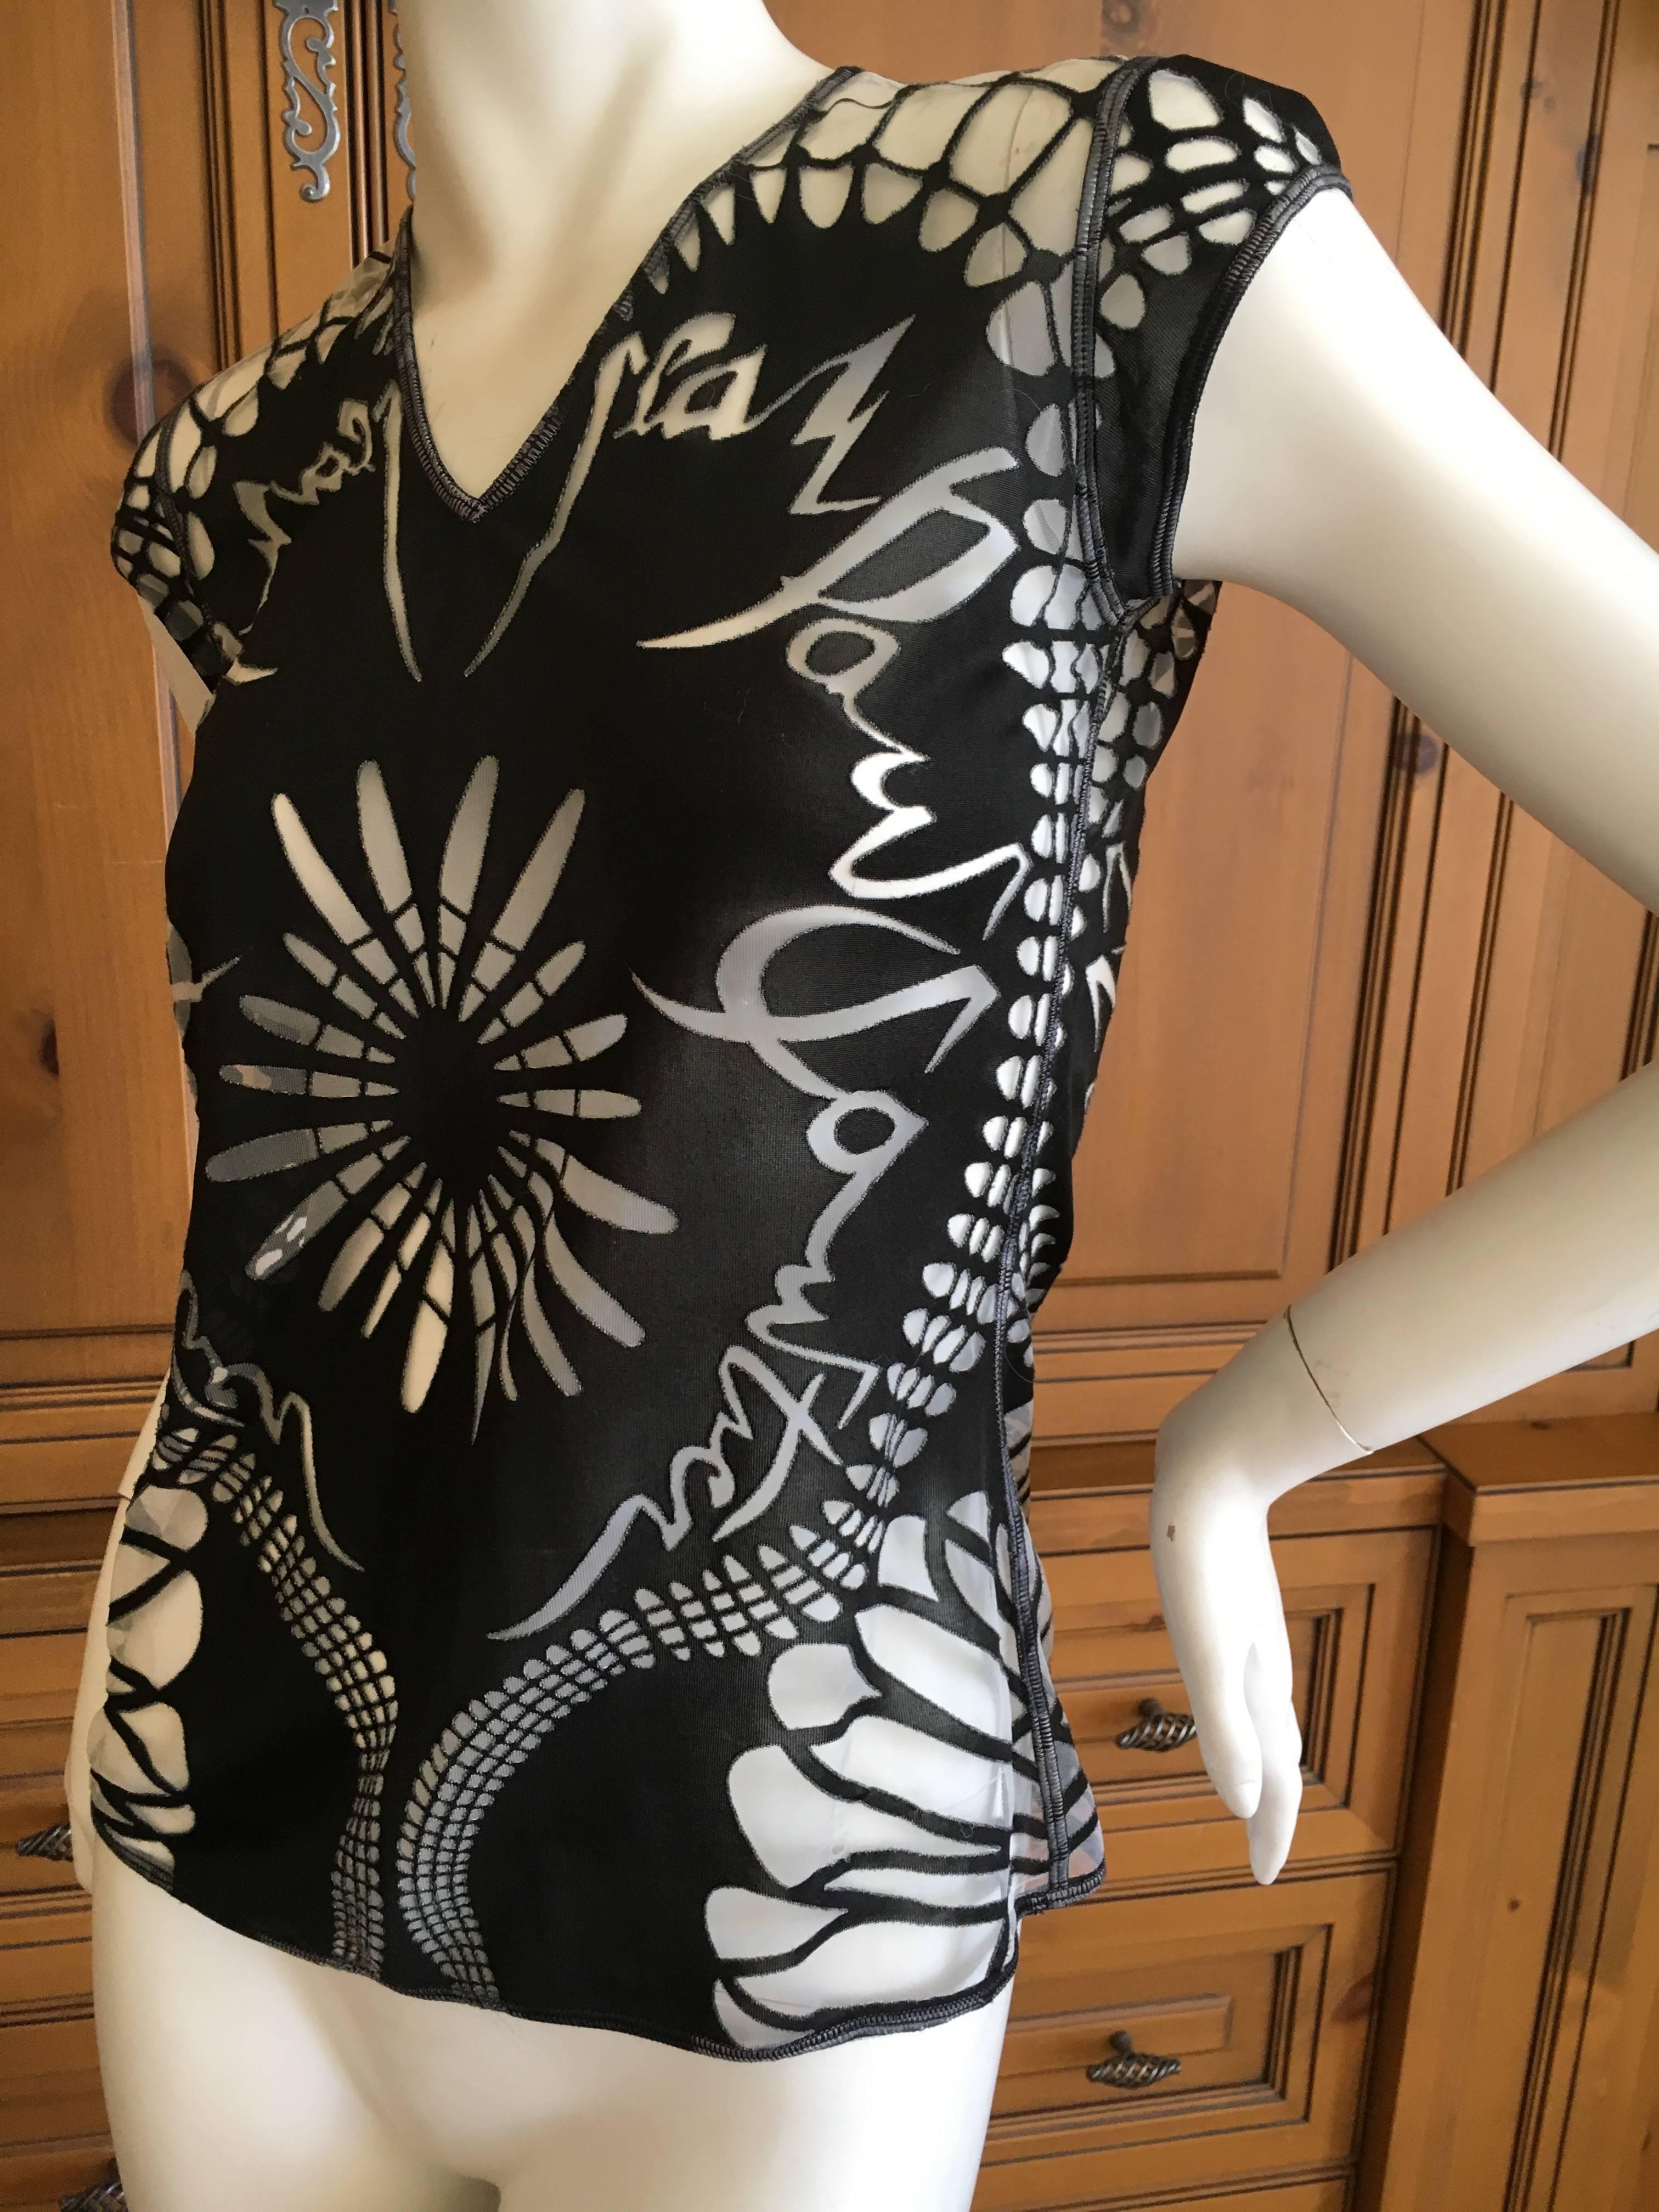 Jean Paul Gaultier Sheer Tattoo Top In Excellent Condition For Sale In Cloverdale, CA